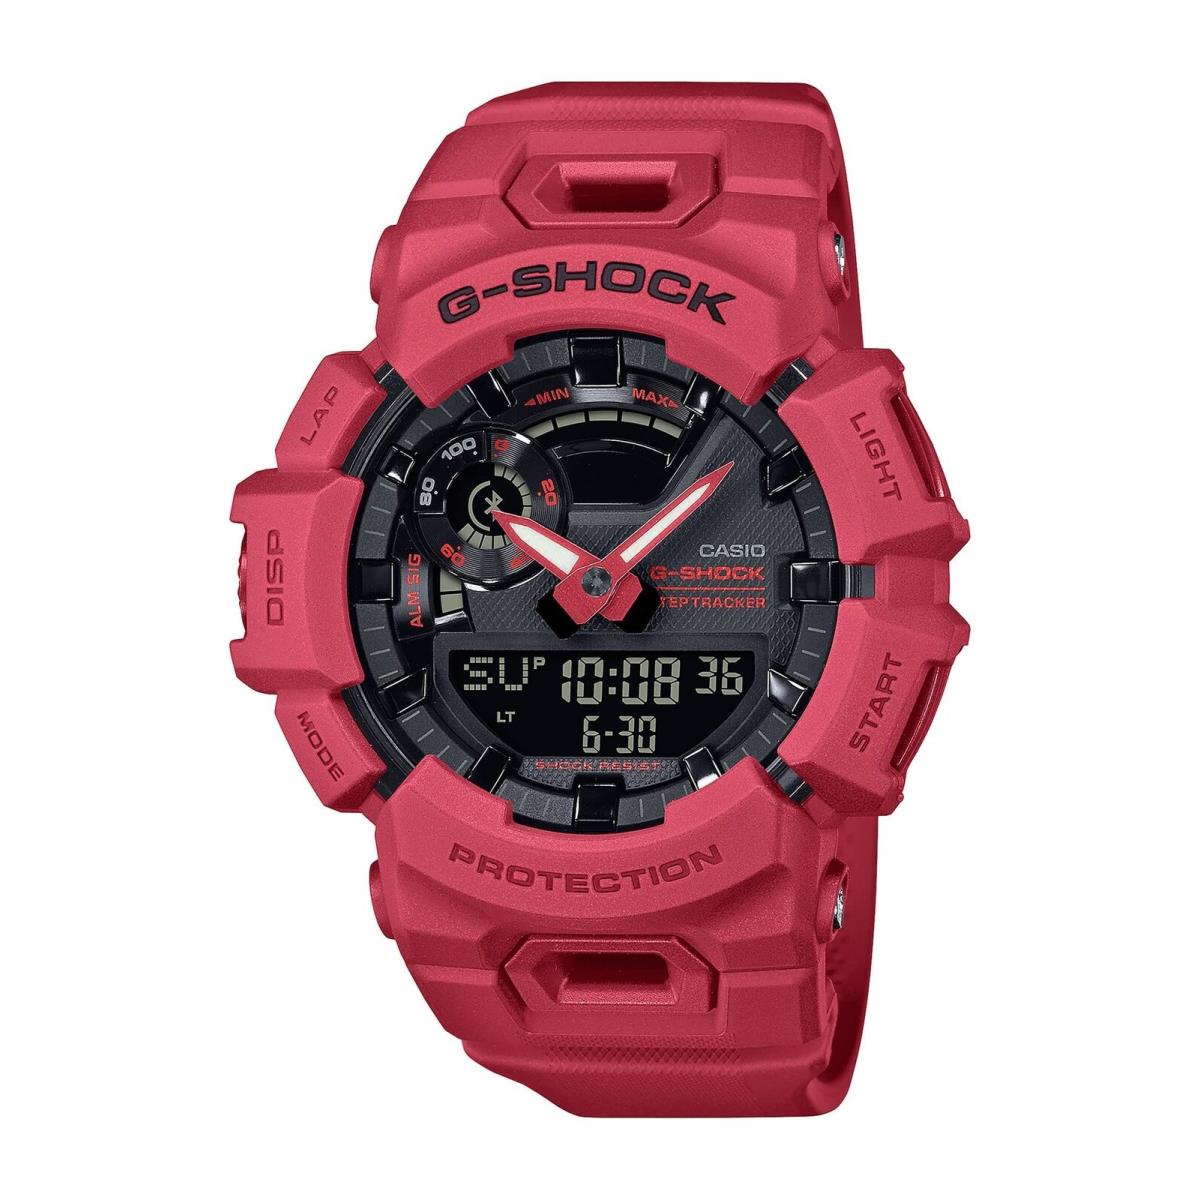 Casio G-shock Mens GBA900RD-4A Red Digital Analog Wrist Watch - Red, Dial: Red, Black, Band: Red